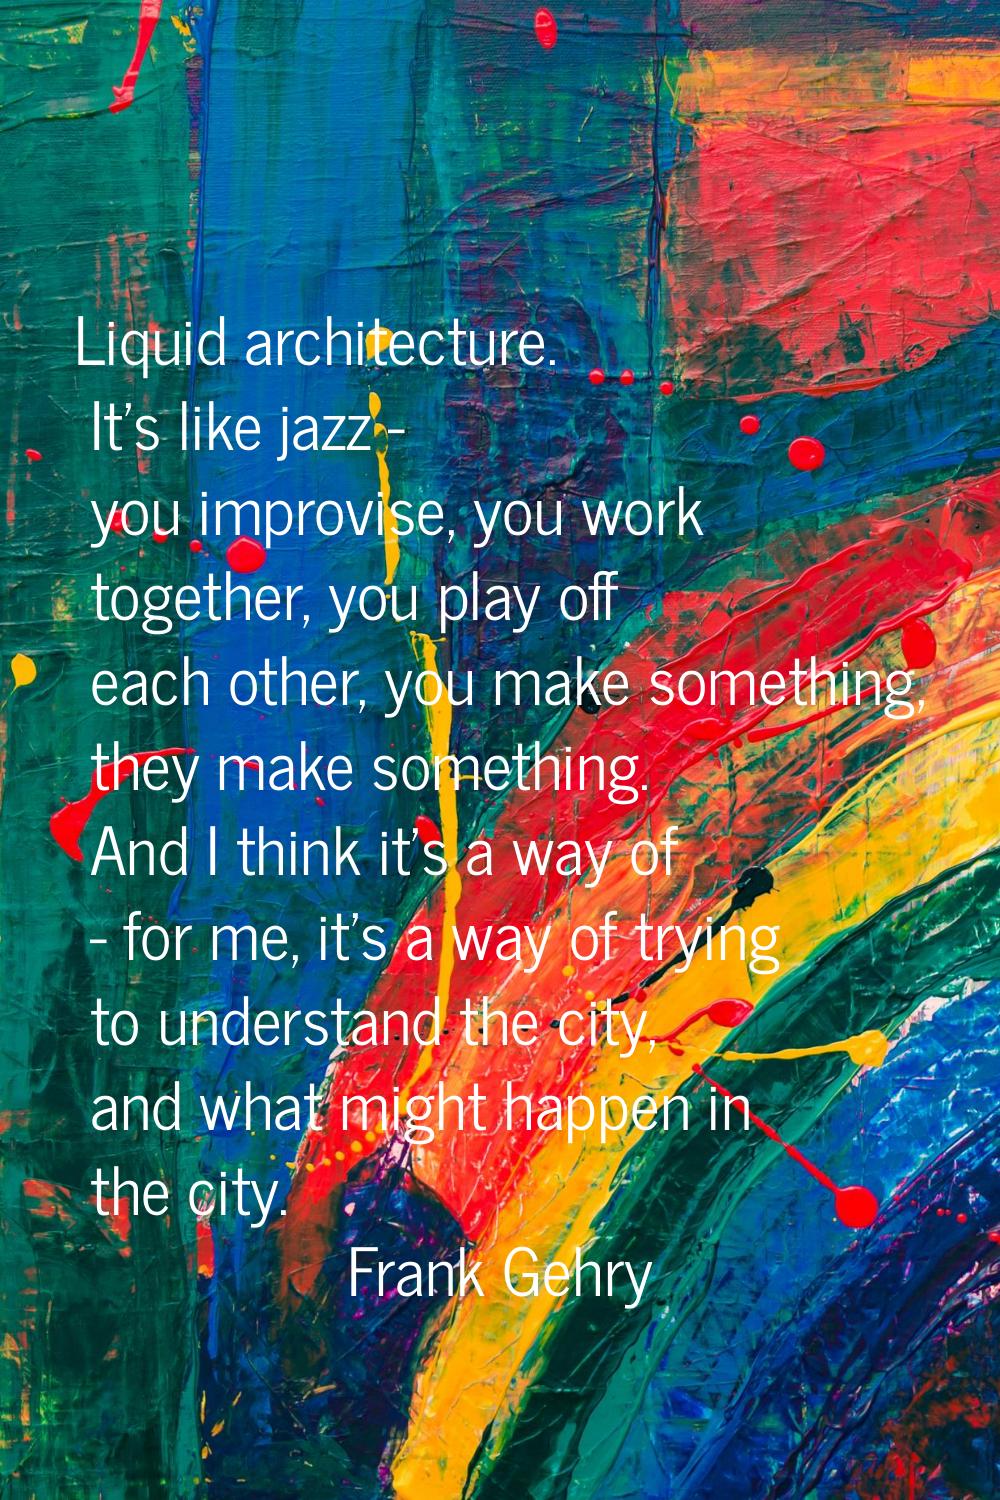 Liquid architecture. It's like jazz - you improvise, you work together, you play off each other, yo